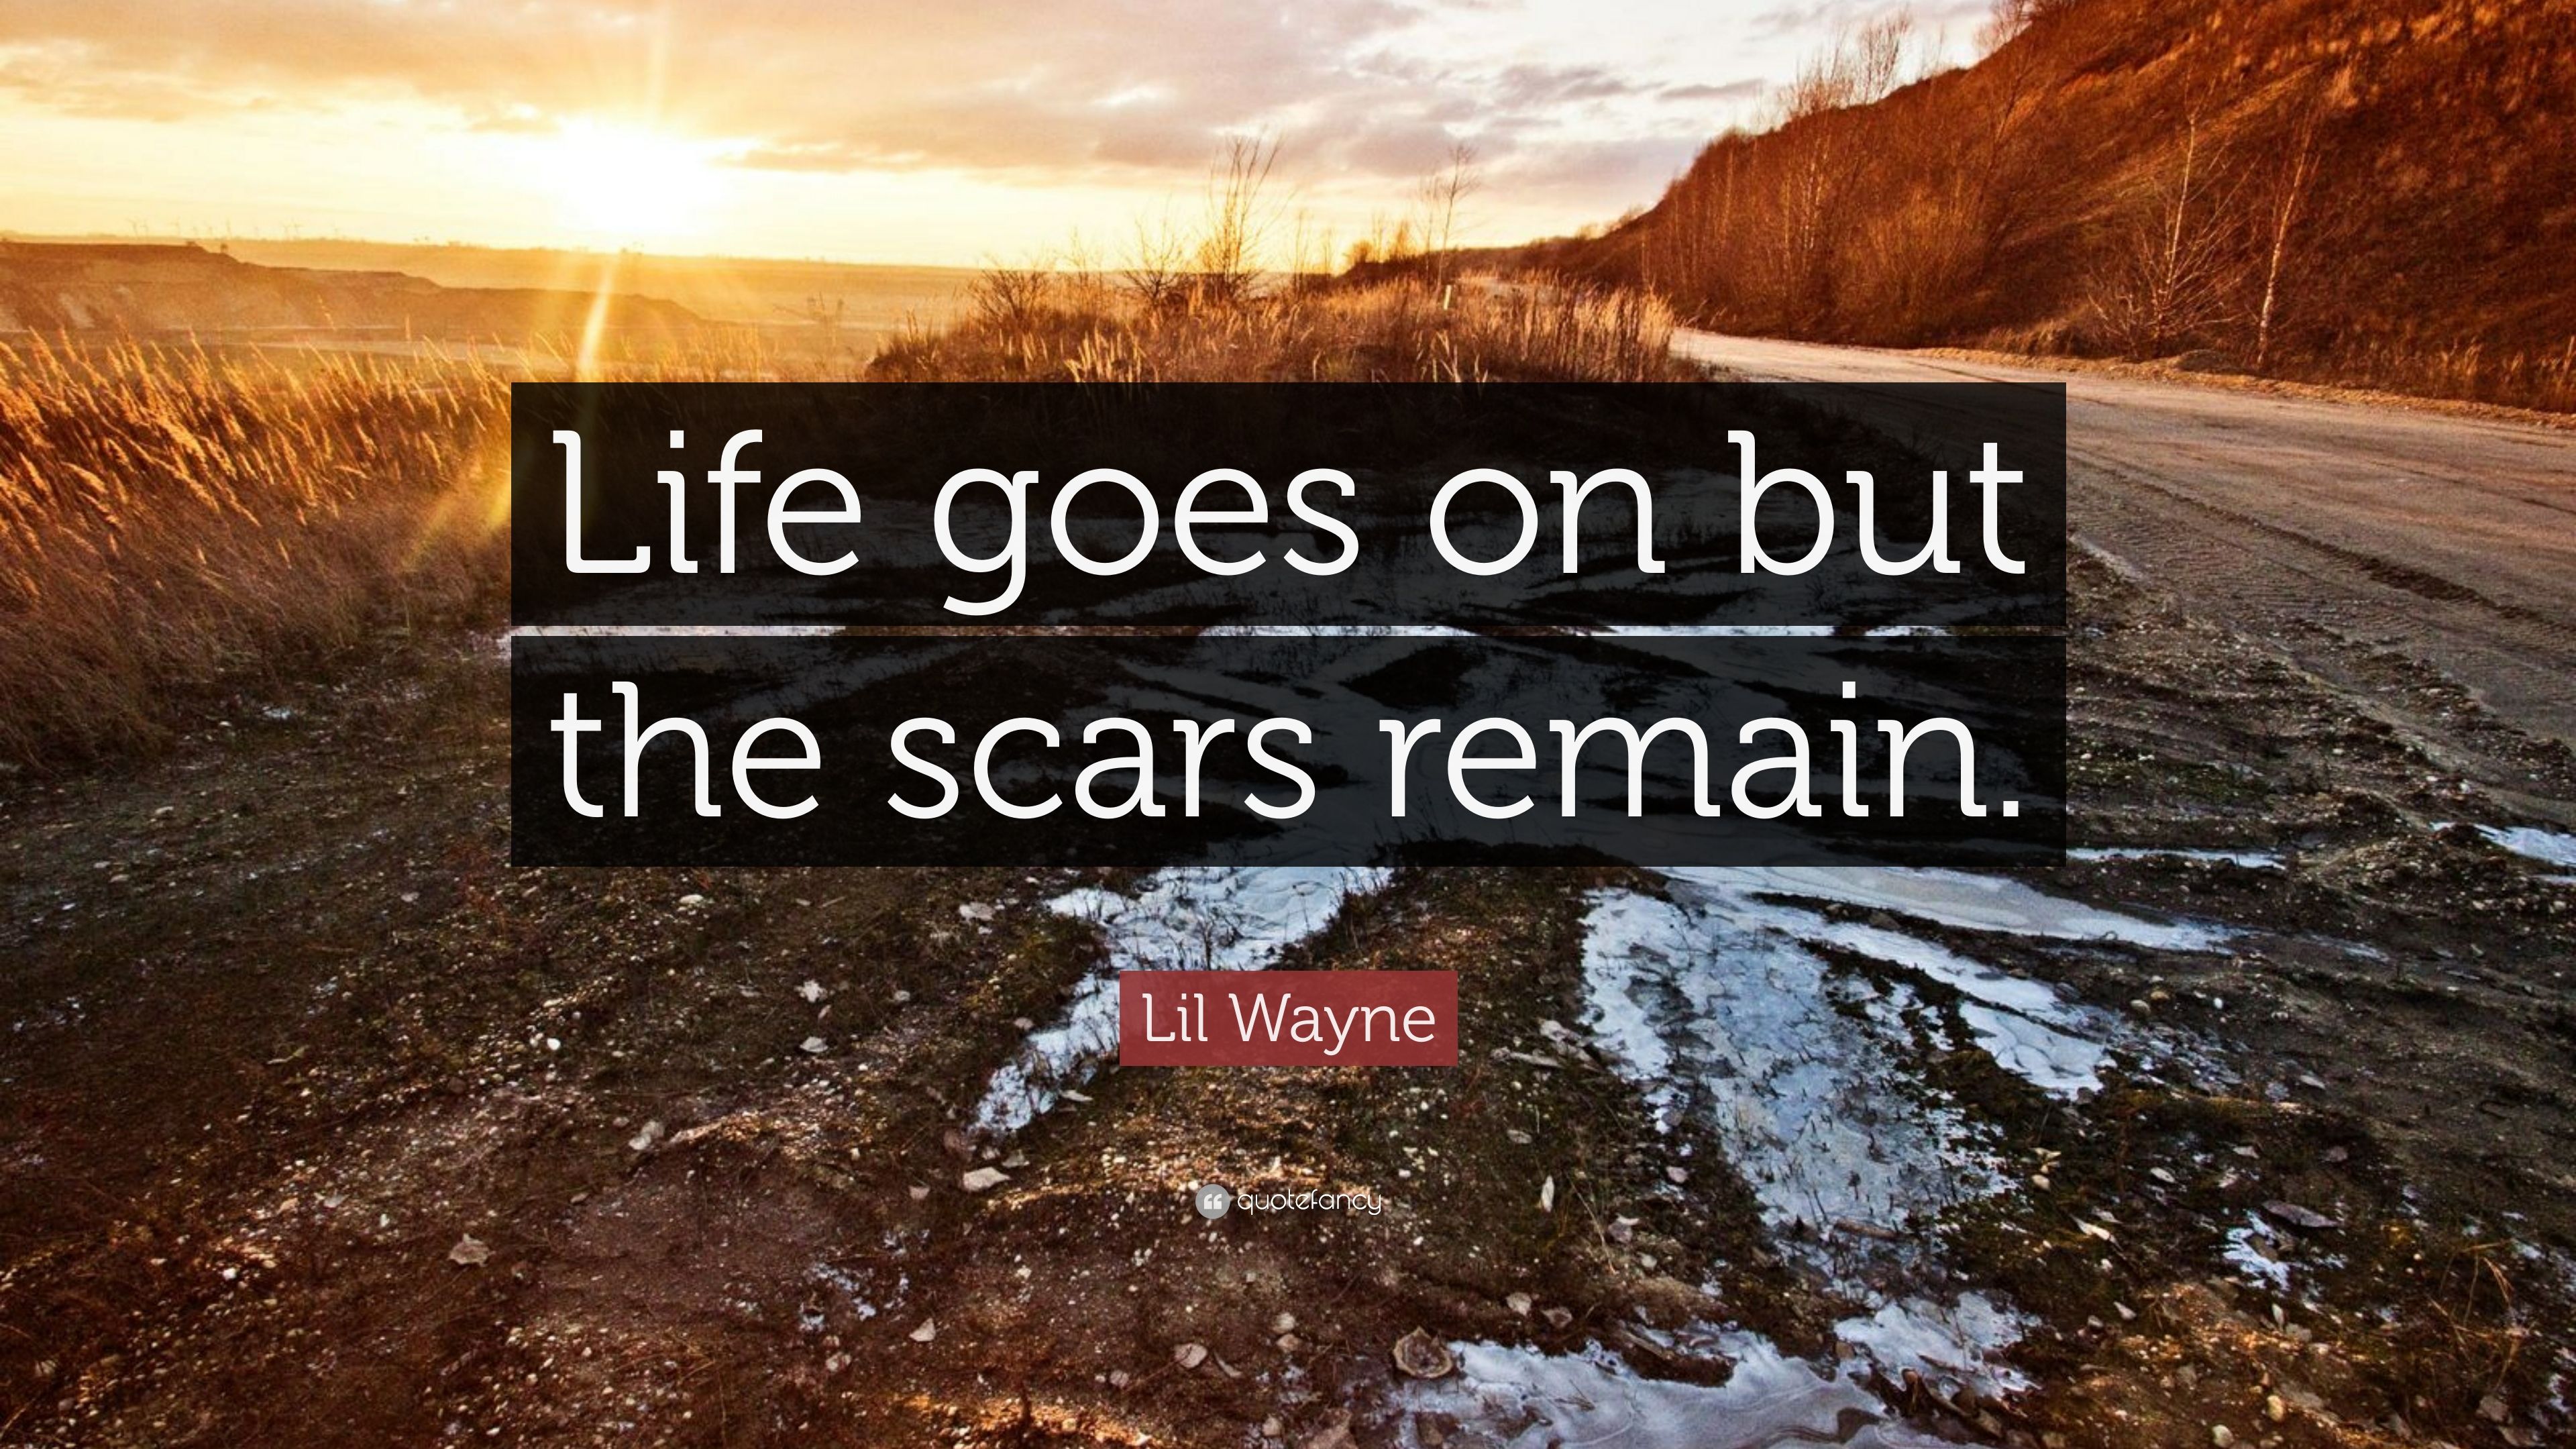 Lil Wayne Quote: “Life goes on but the scars remain.” 12 wallpaper